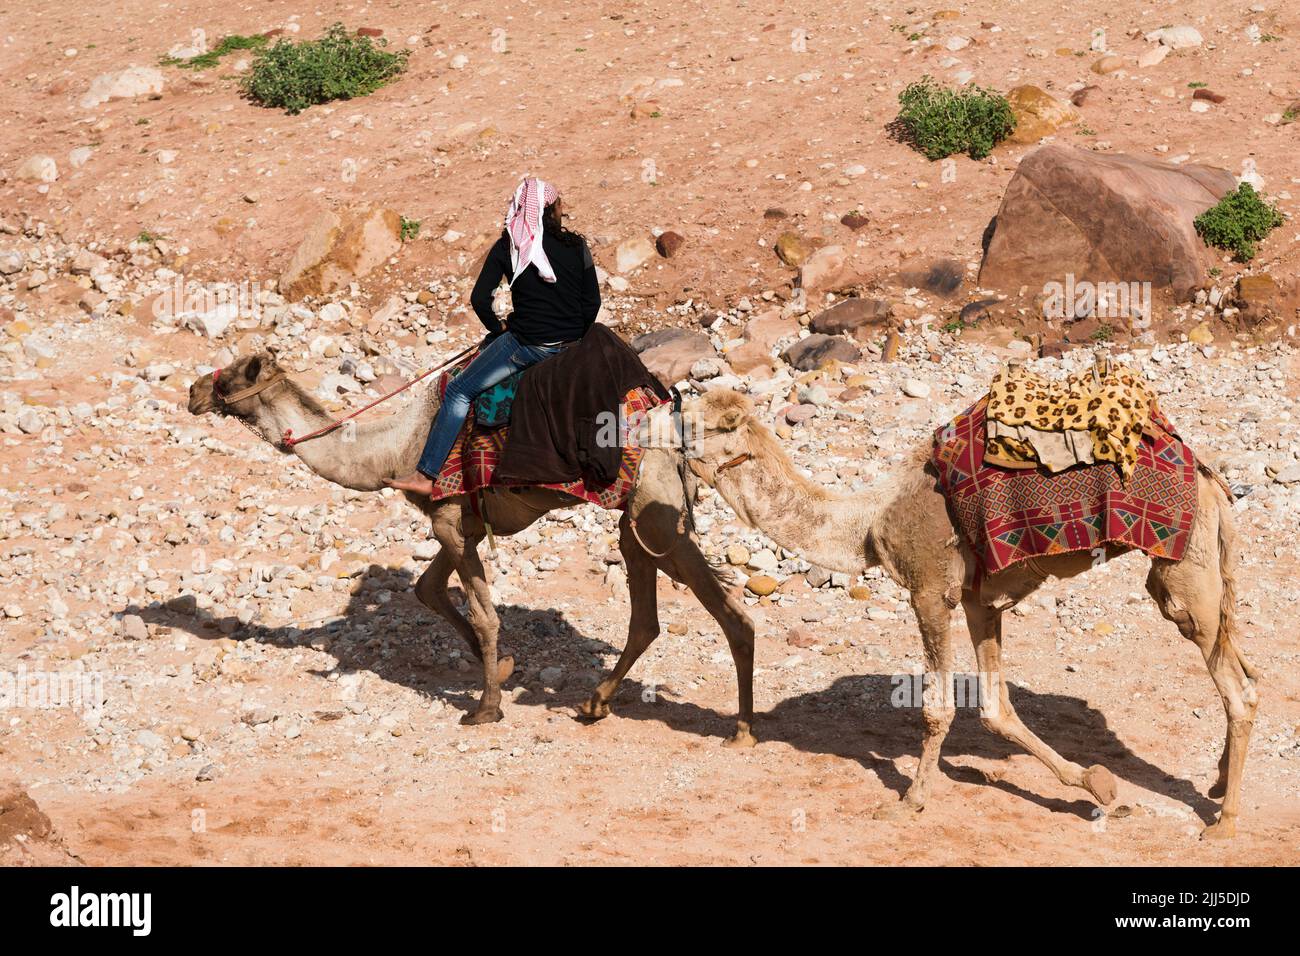 Local man on camel in the ancient city of Petra, Jordan. Camels served as exotic transport for tourists visited this UNESCO World Heritage site Stock Photo